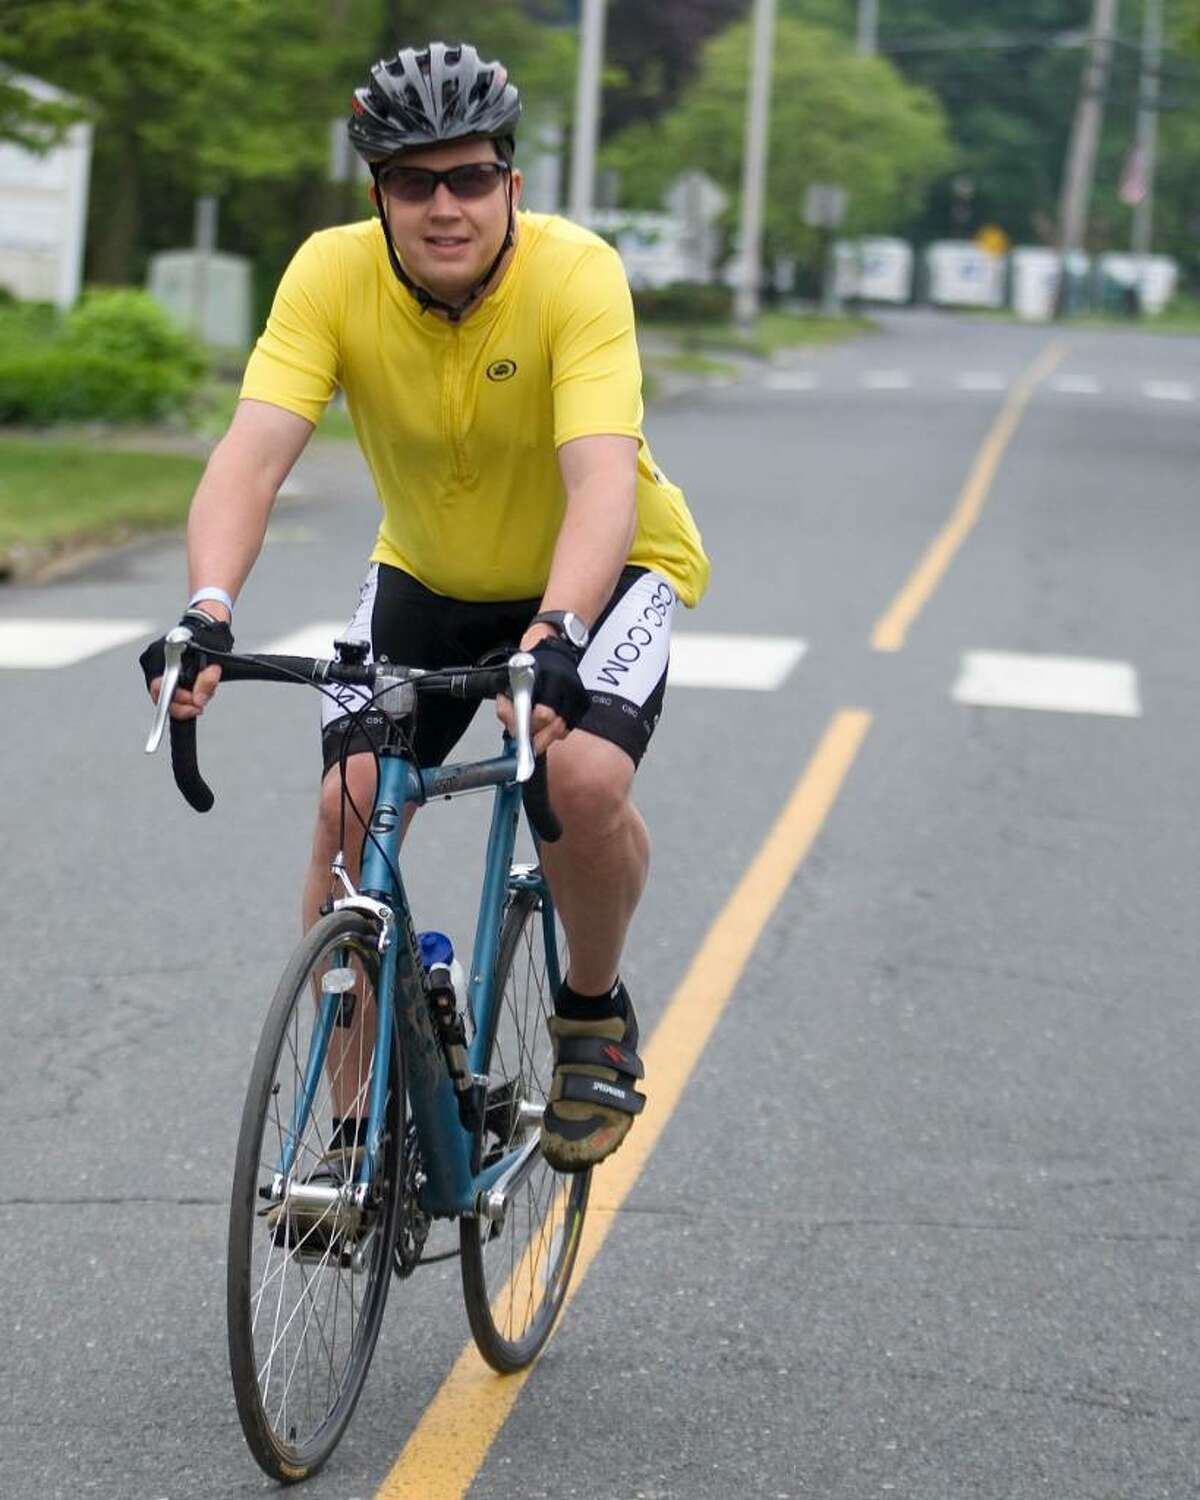 New Fairfield resident Marty Boardman takes off on a 51 mile ride during the 18th annual Cyclefest held by the Hat City Cyclists which started and ended in Bethel Sunday.